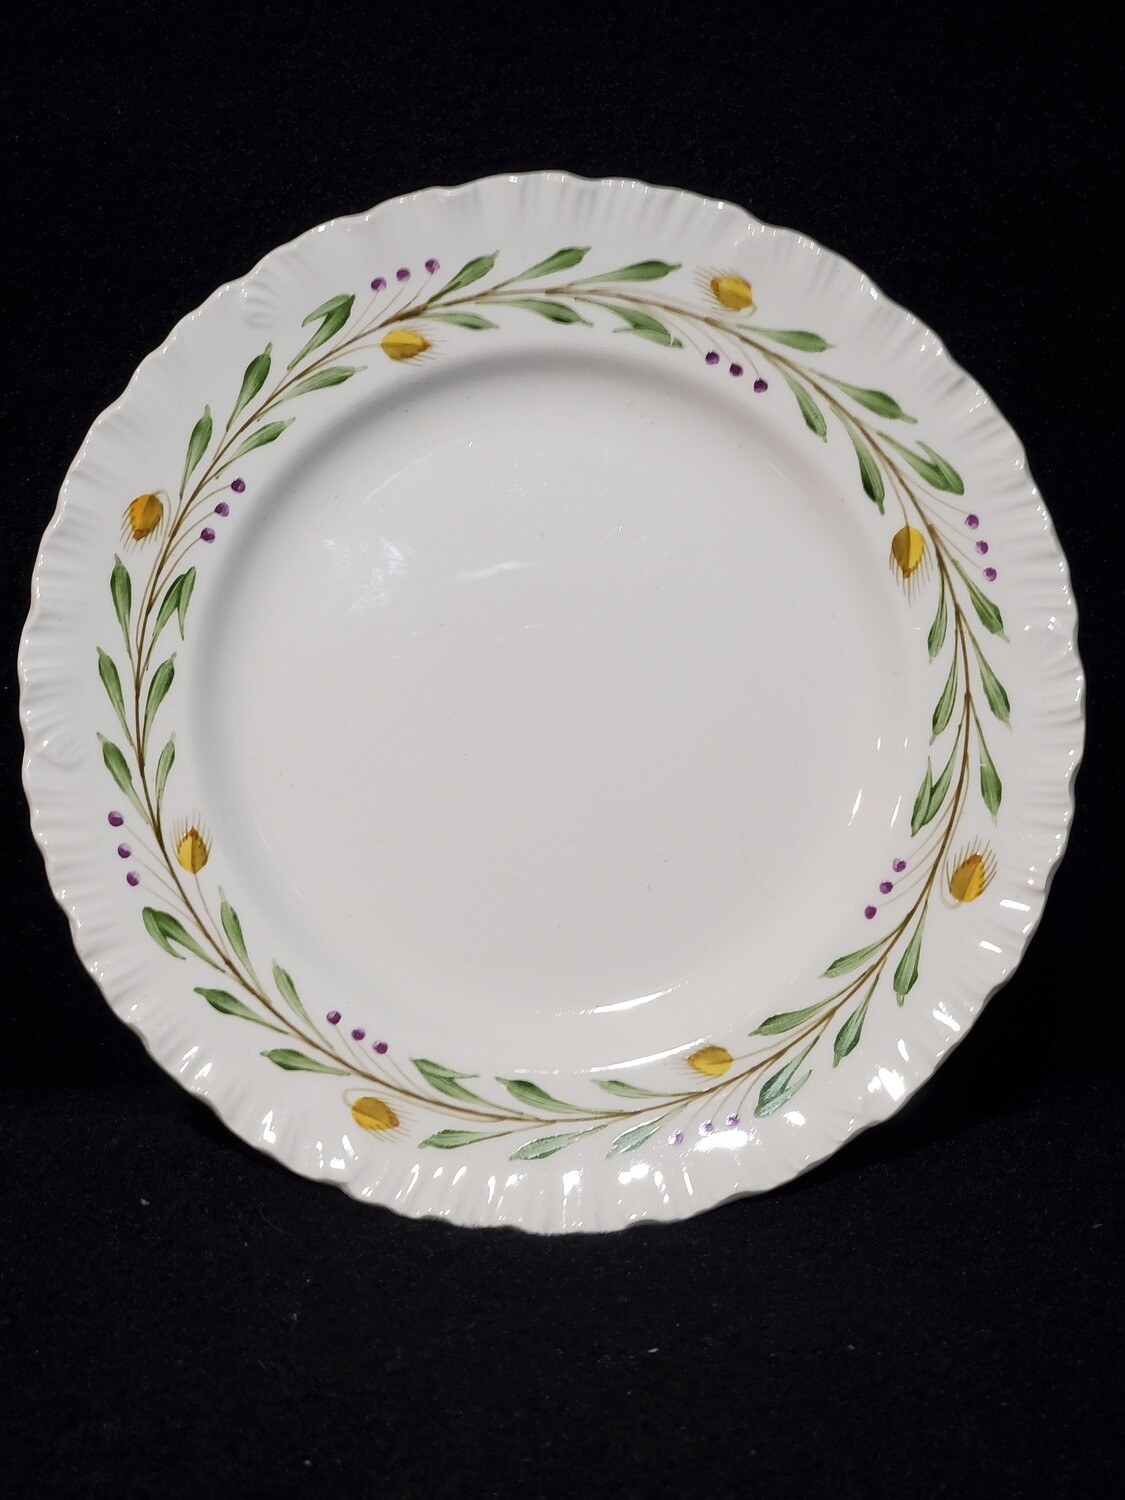 Wedgwood China, Bread & Butter Plate 6 3/8", Barley #A9772 Pattern